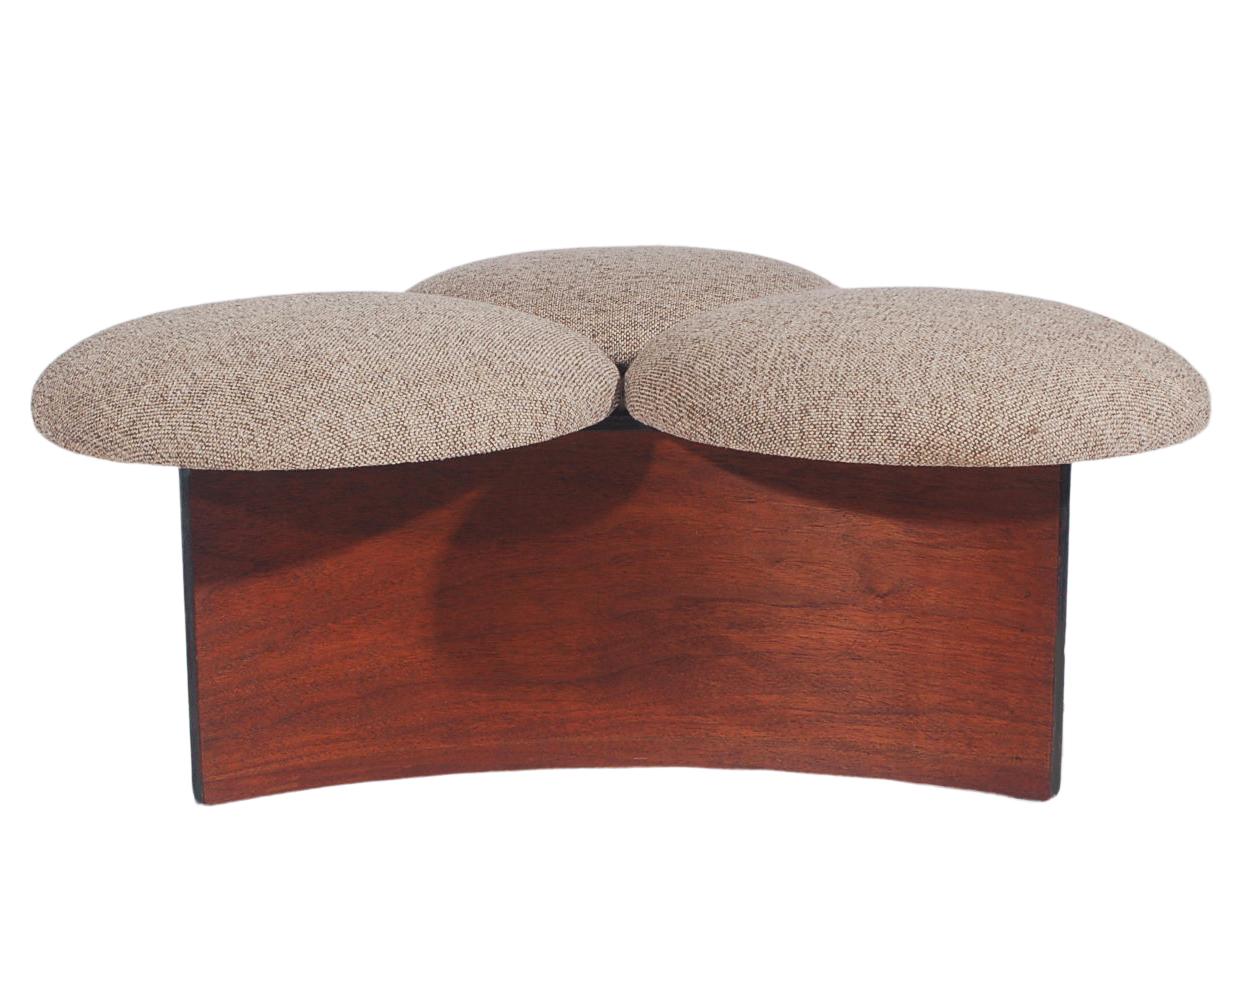 A unique piece probably from Scandinavia, circa 1960s. It consists of a walnut stained bentwood base with three circular cushions. The cushions were recently recovered in a neutral tweed fabric.